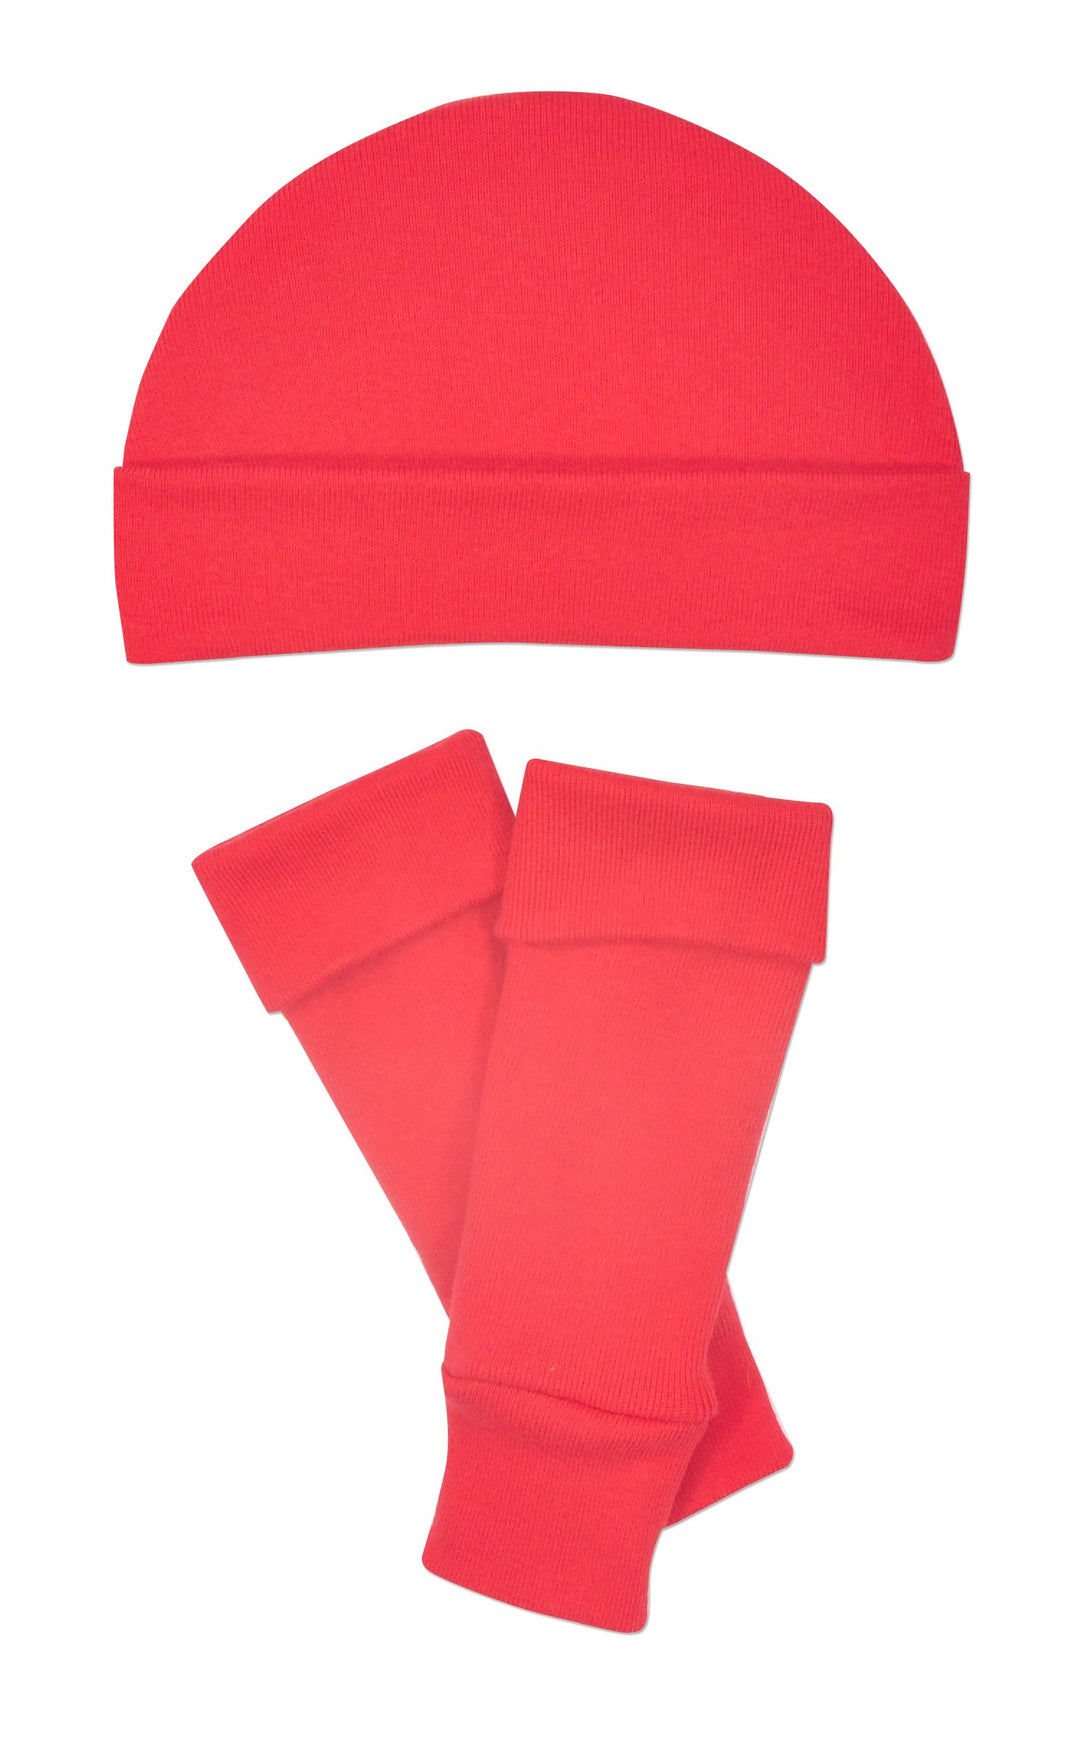 Solid Red Accessory Sets